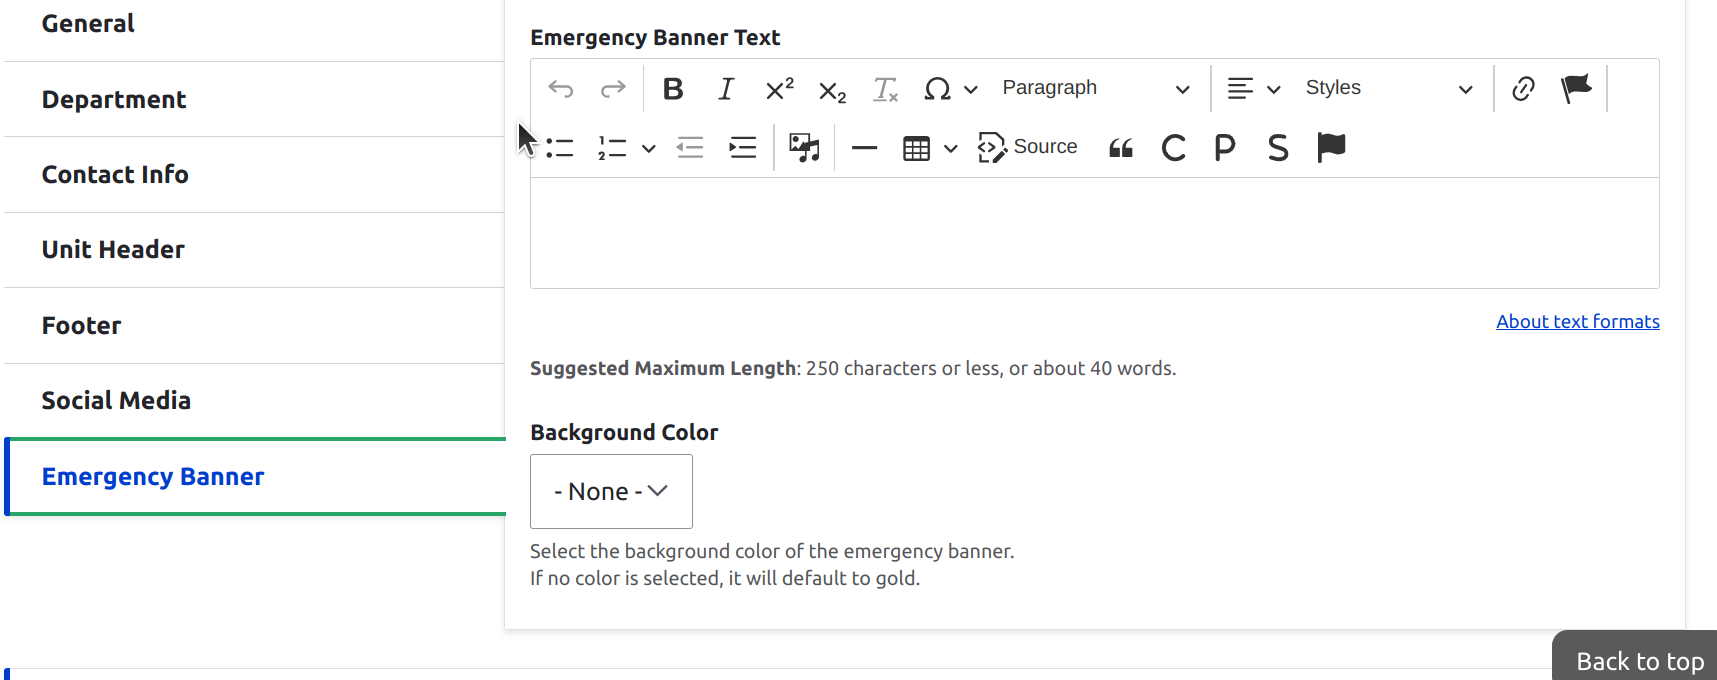 Editor interface for emergency banner